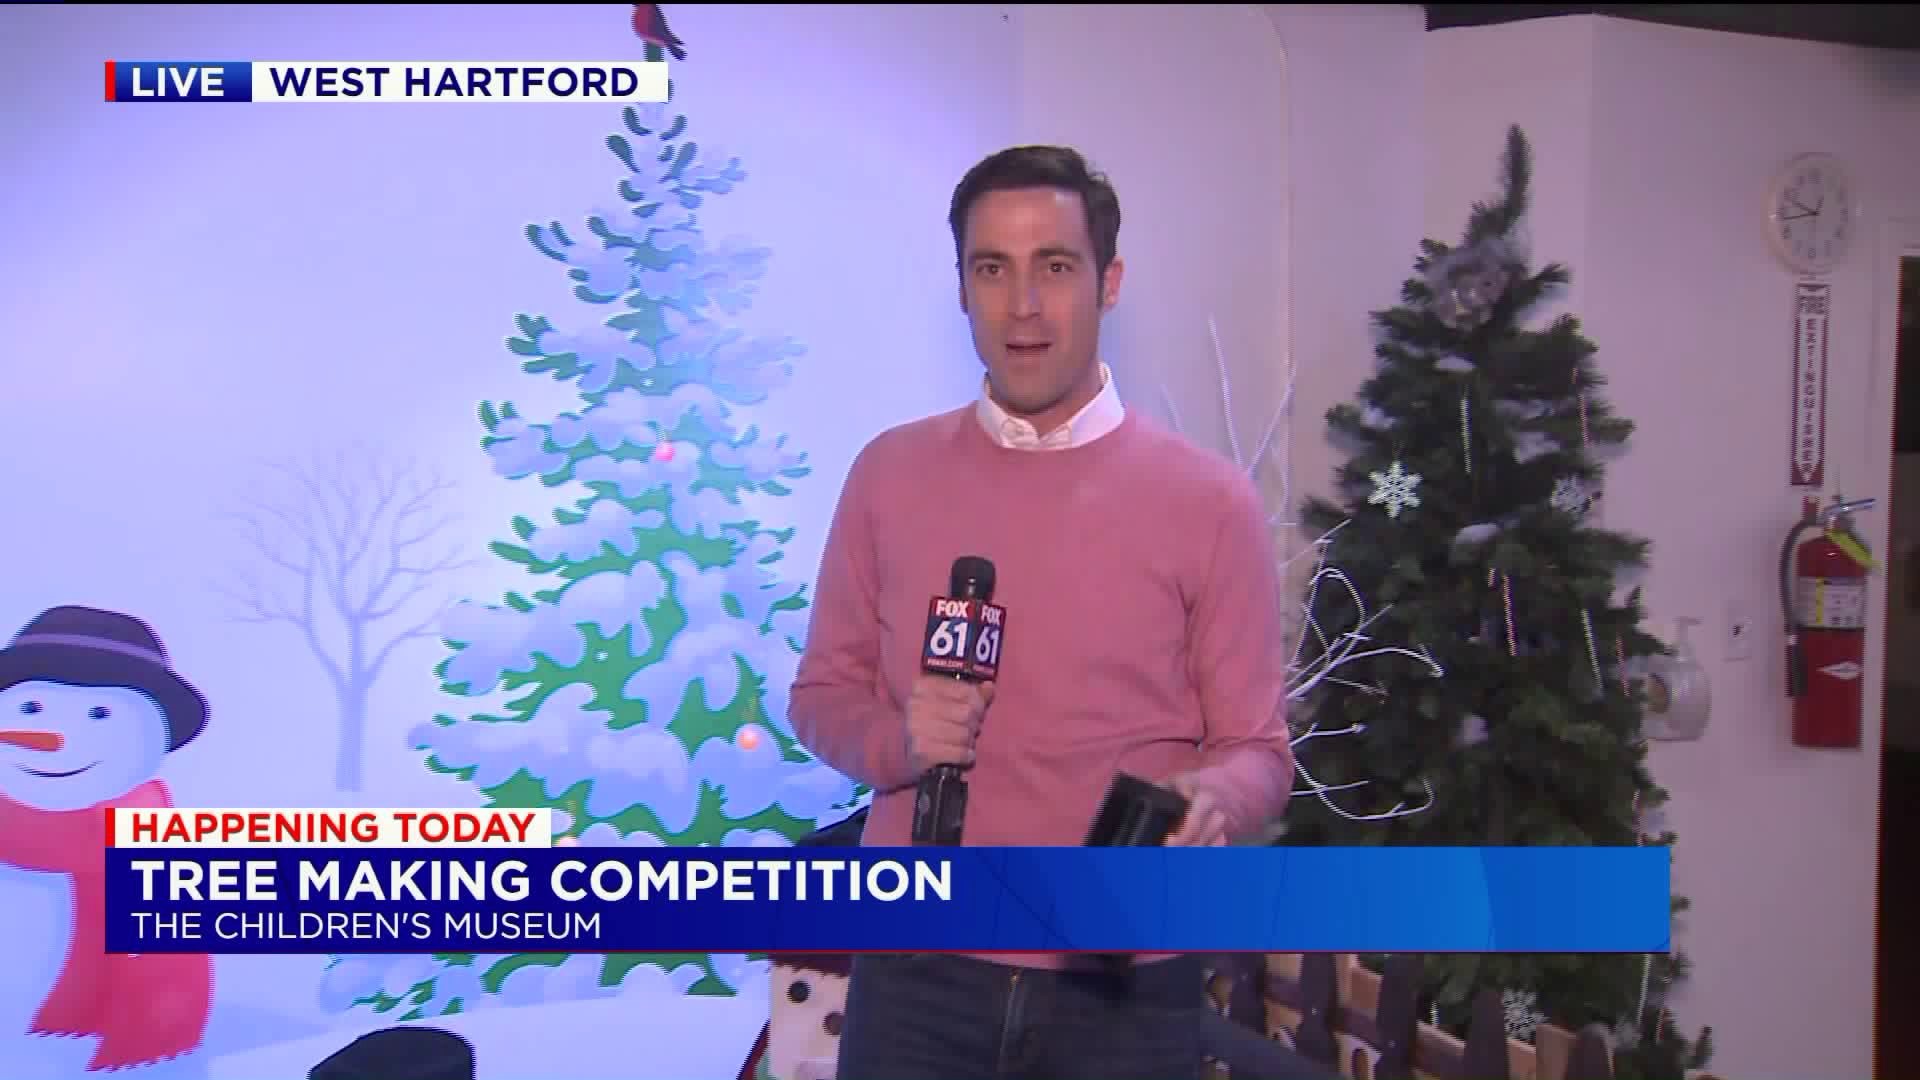 Tree making competition